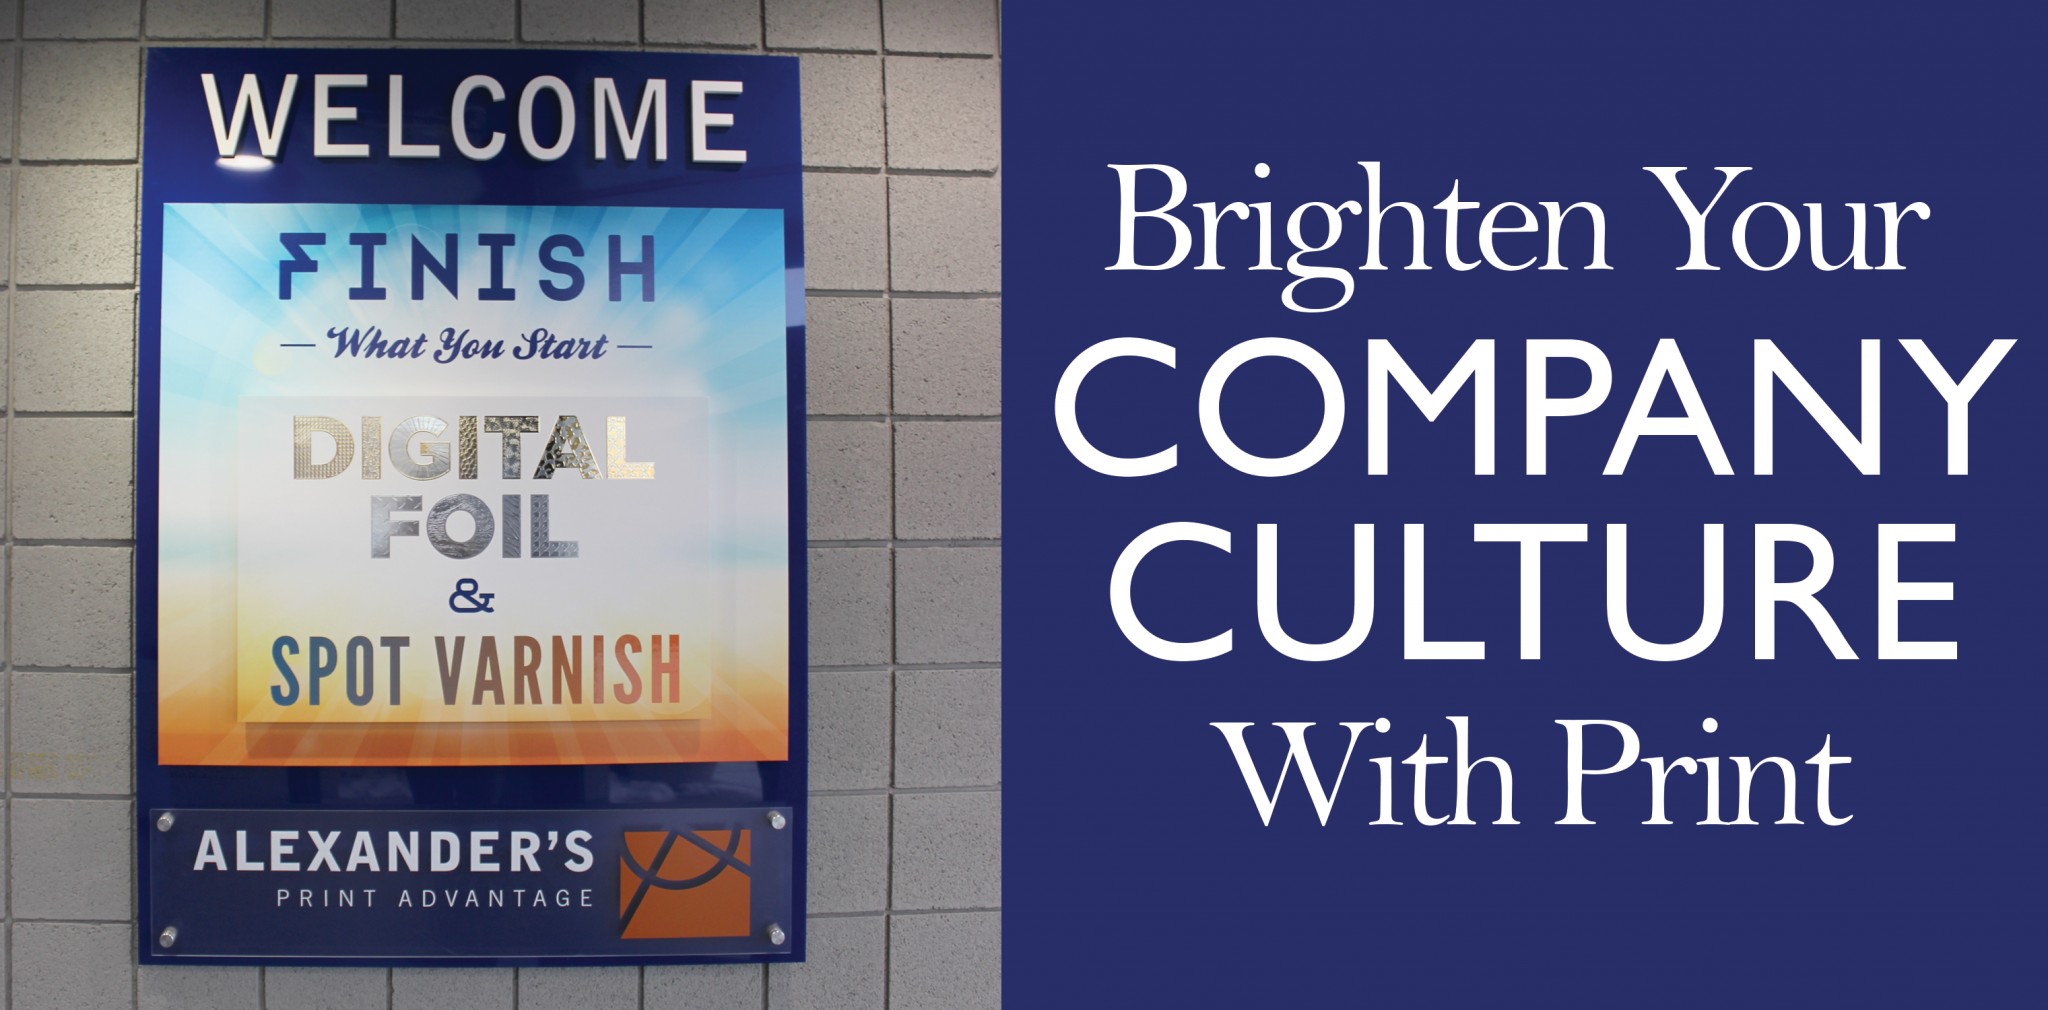 Brighten Your Company Culture With Print